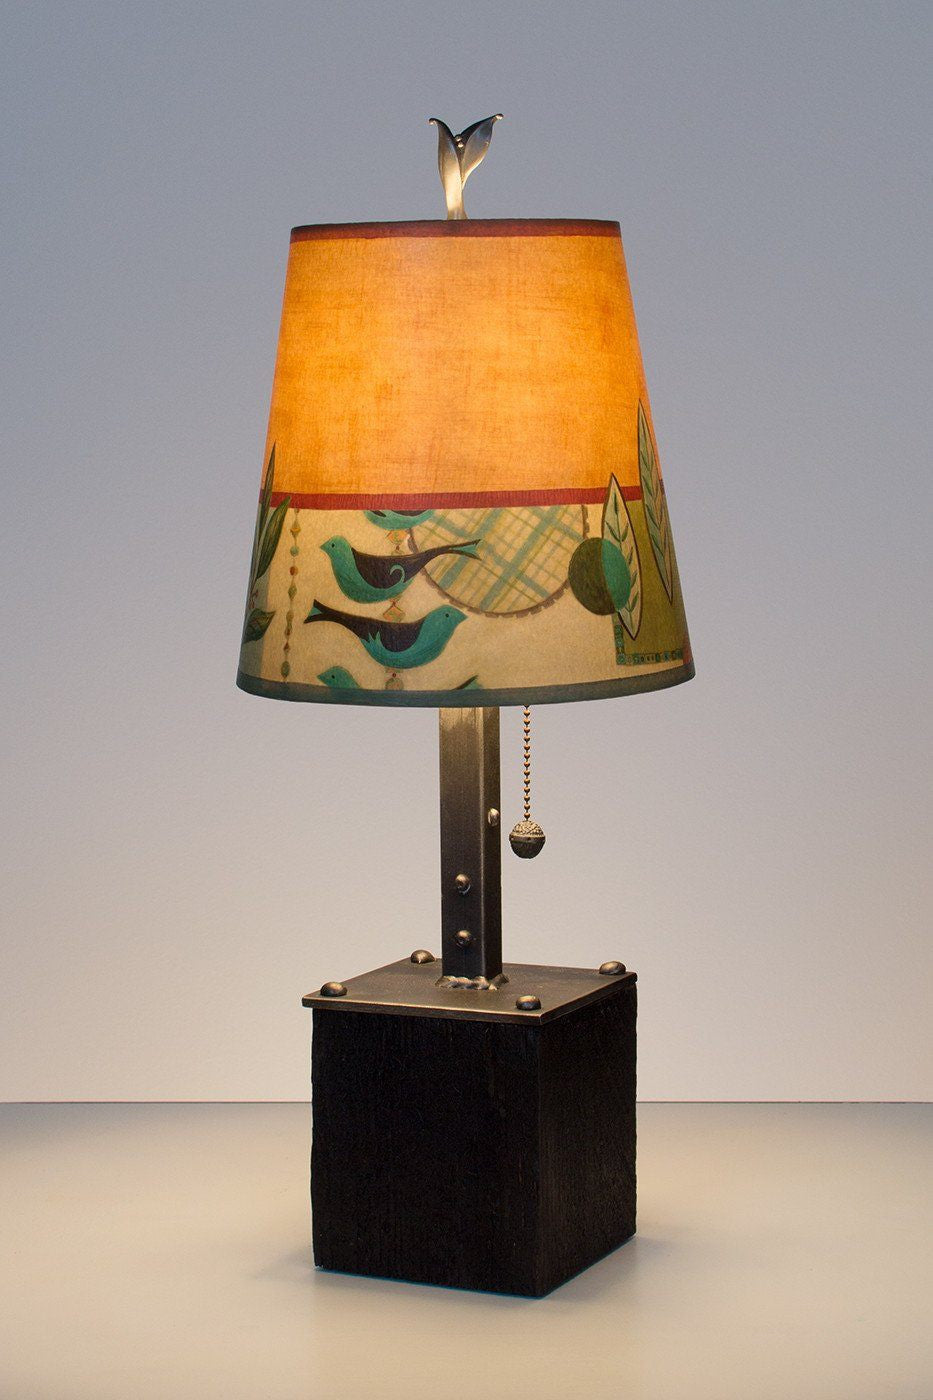 Janna Ugone &amp; Co Table Lamps Steel Table Lamp on Reclaimed Wood with Small Drum Shade in New Capri Spice